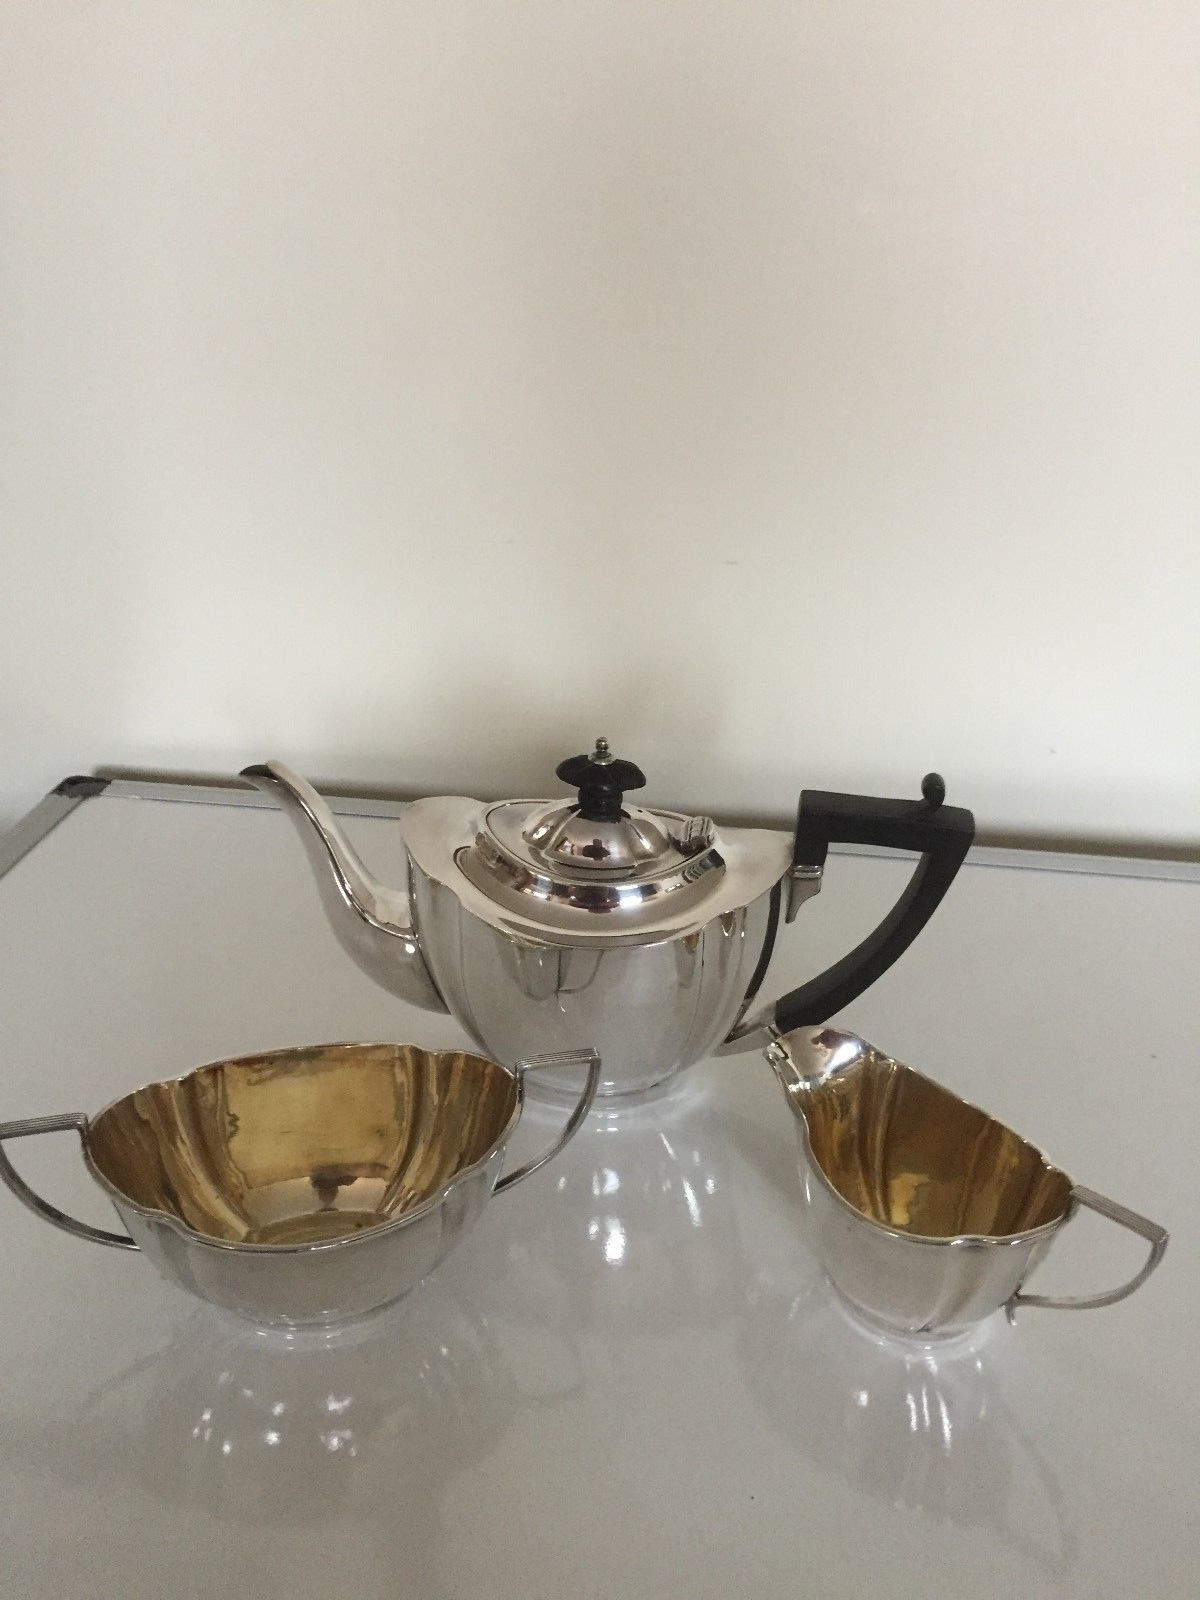 27 Fantastic Silver Plated Trumpet Vase 2024 free download silver plated trumpet vase of daasy uk silver mappin webb in lovely 3 piece batchelor silver plated tea service spts 16 mappin webb